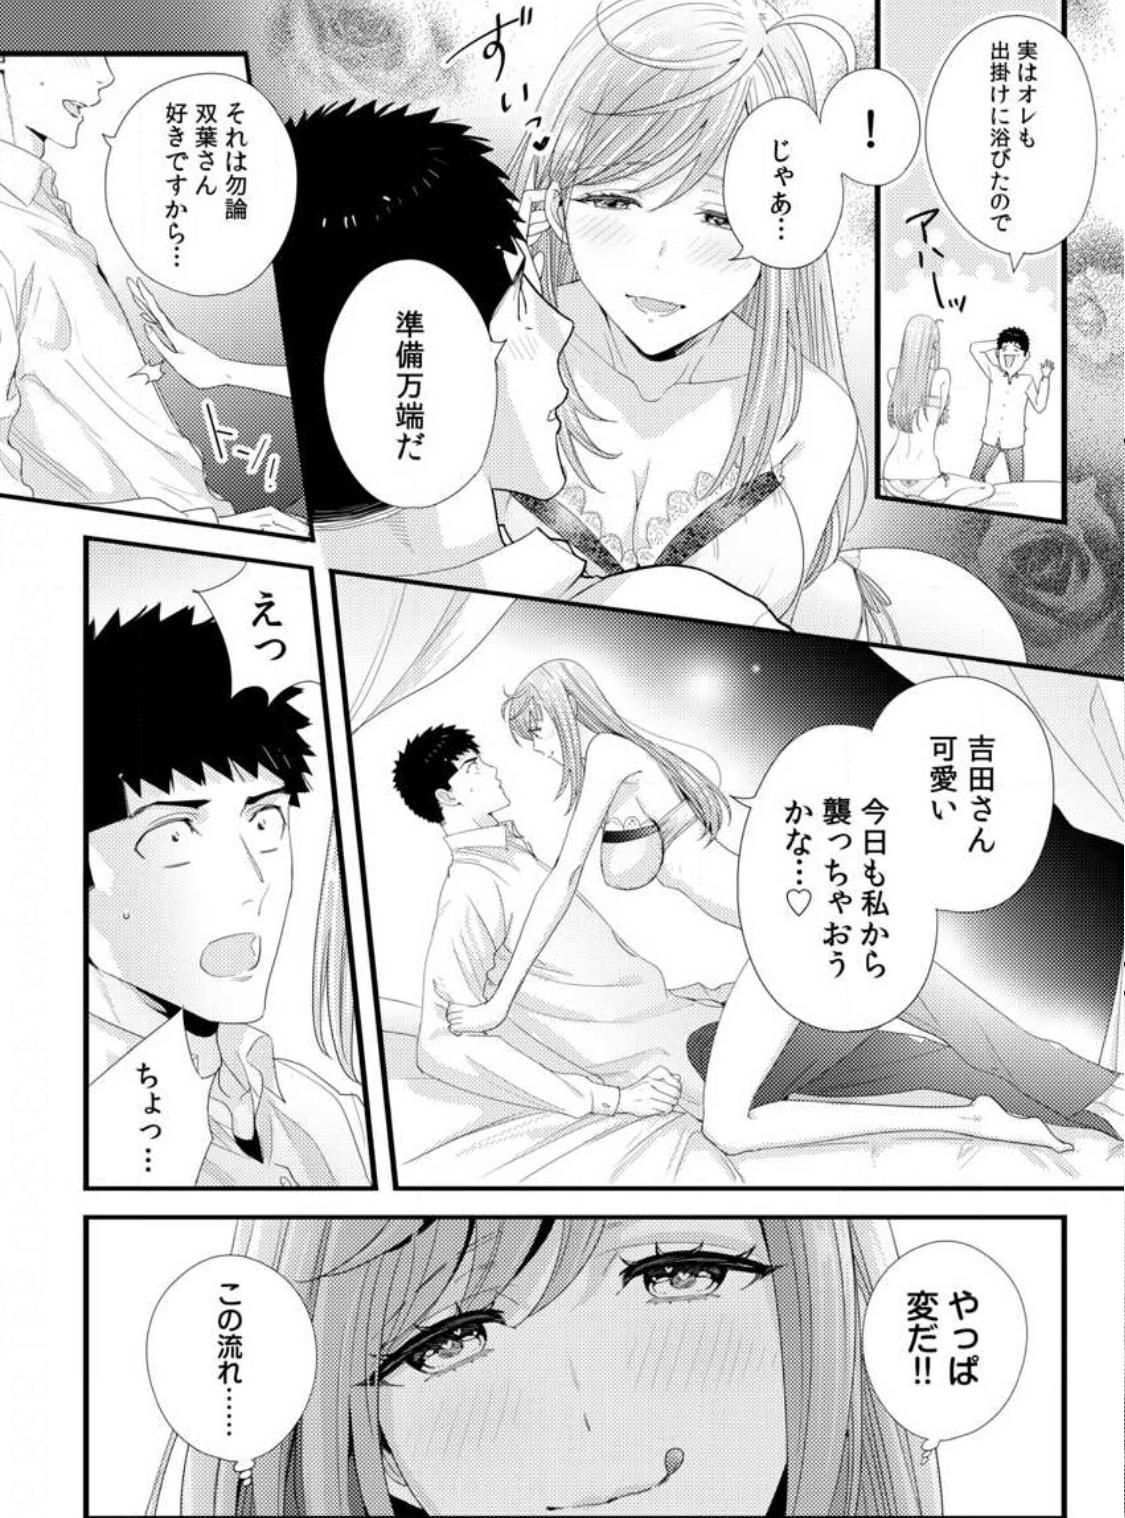 Please Let Me Hold You Futaba-San! Ch. 1-4 92